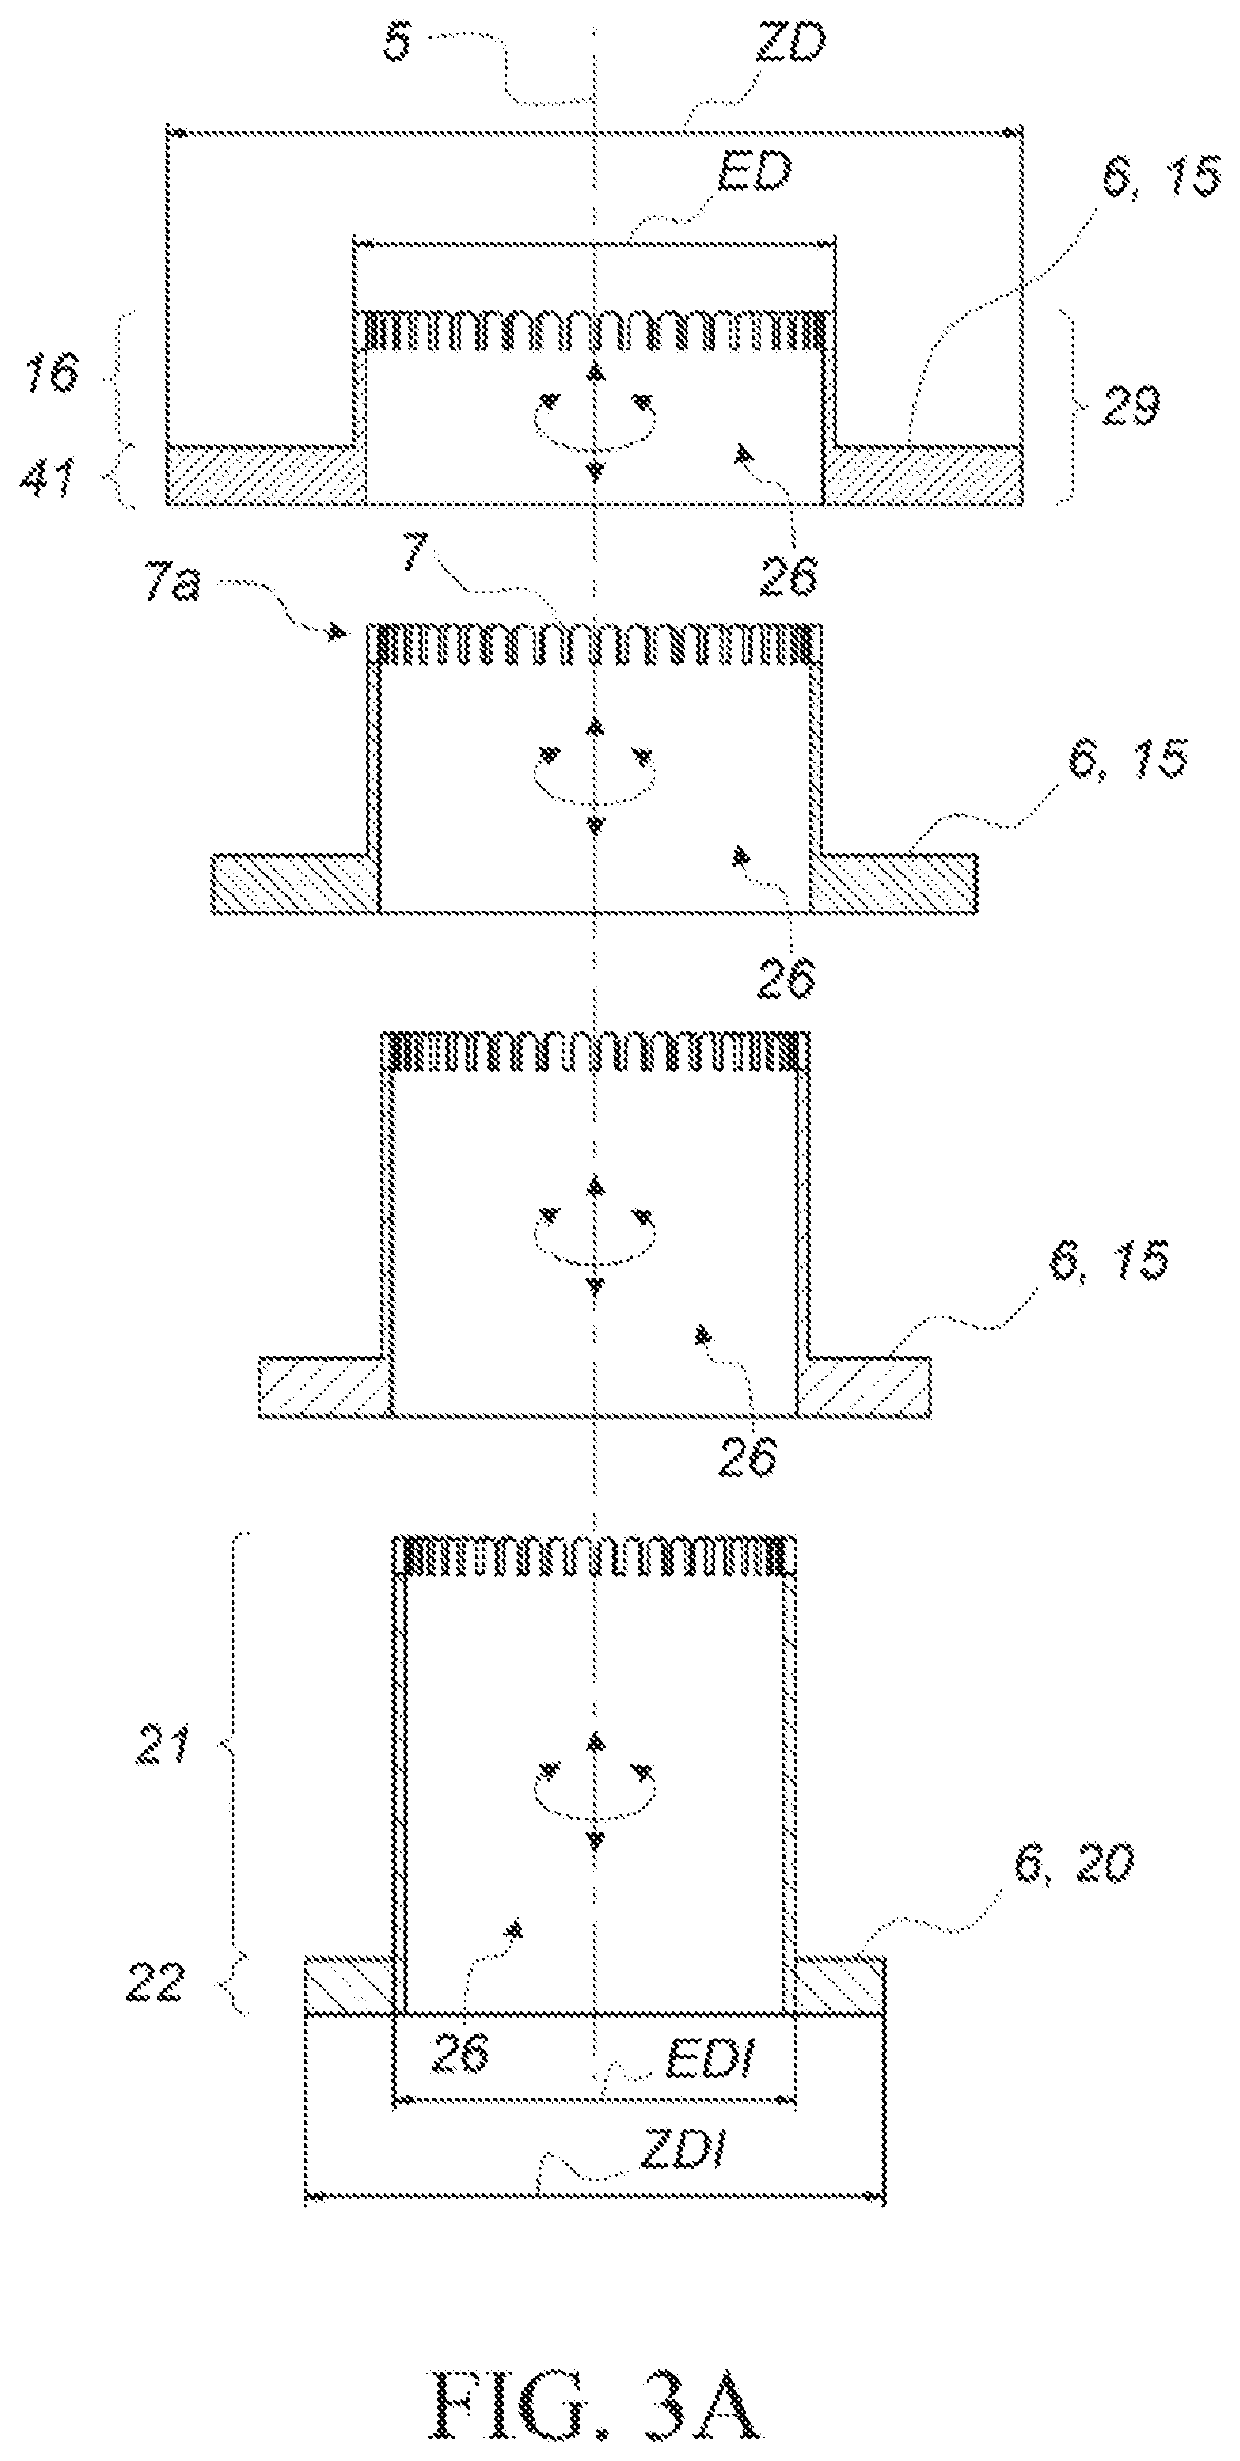 Apparatus for bending ends, arranged in annular layers, of bar conductors of a stator of an electrical machine